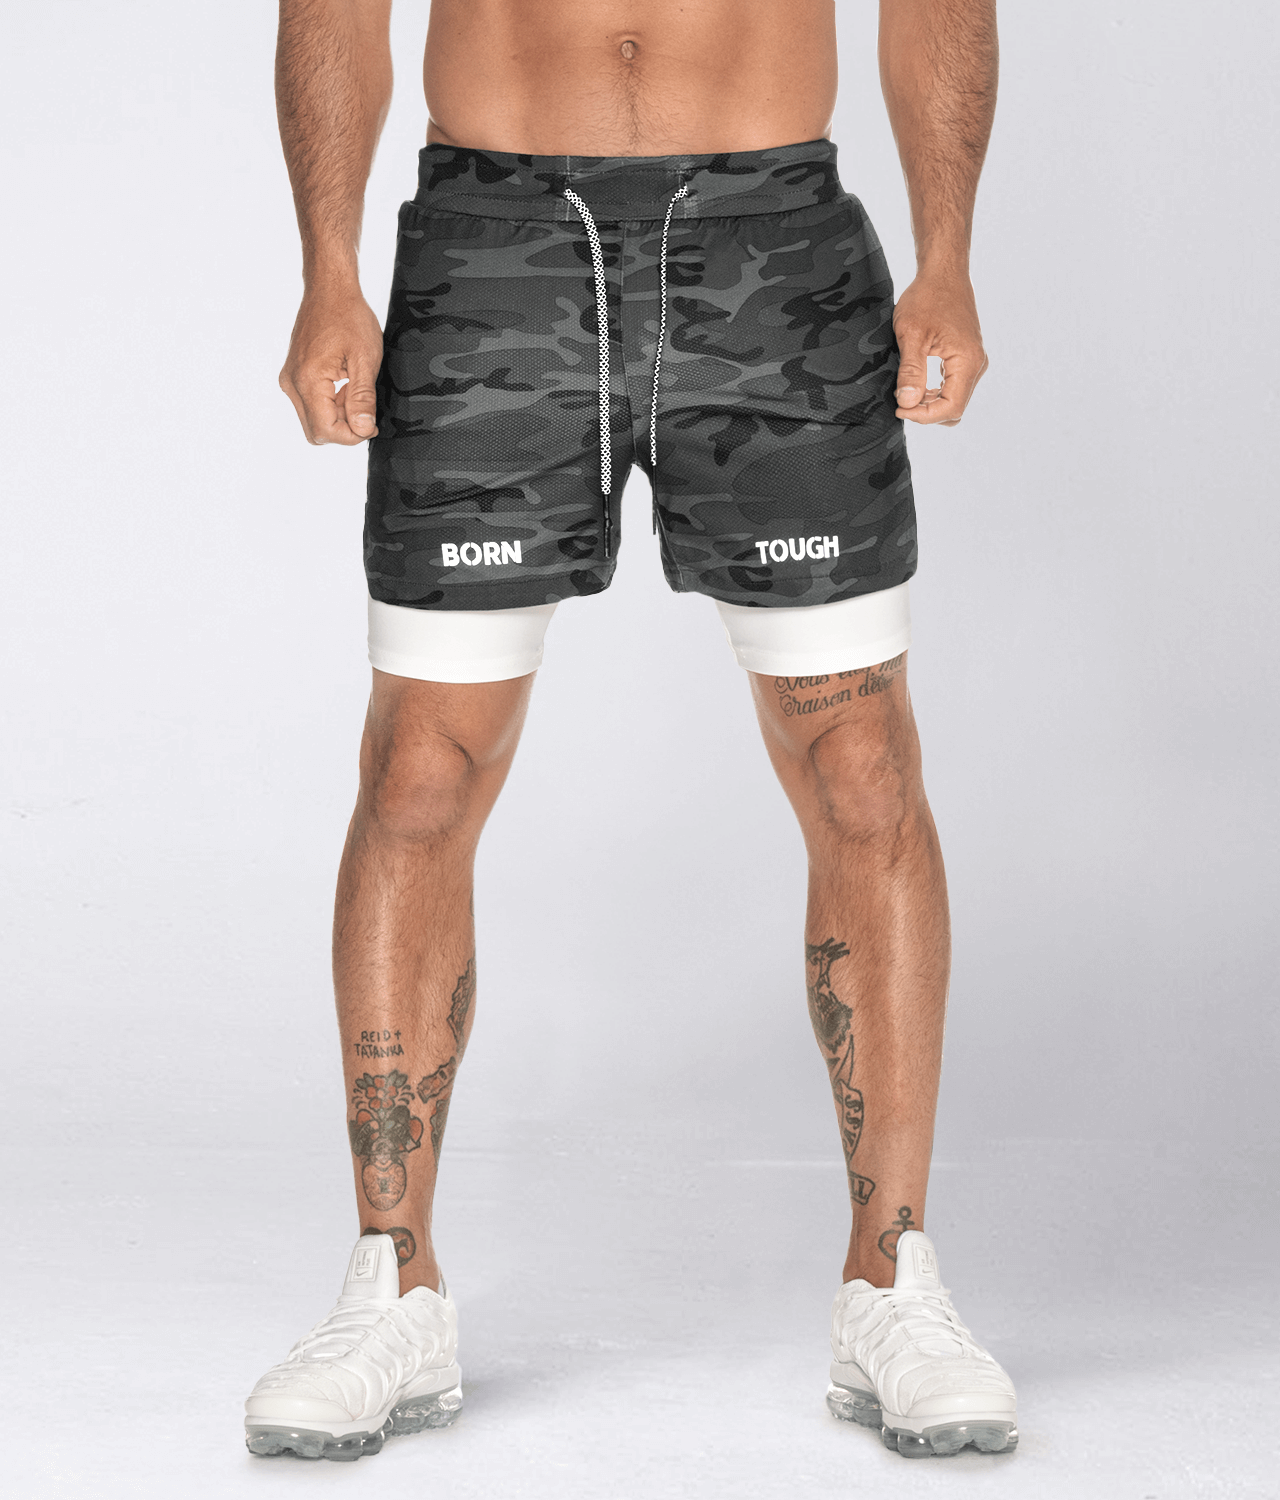 Born Tough 2 in 1 Gym Workout Shorts, 5” Inseam Athletic Bodybuilding  Shorts for Men, Cargo Running Shorts with Liner Pocket (as1, Alpha, s,  Regular, Regular, Black) at  Men's Clothing store